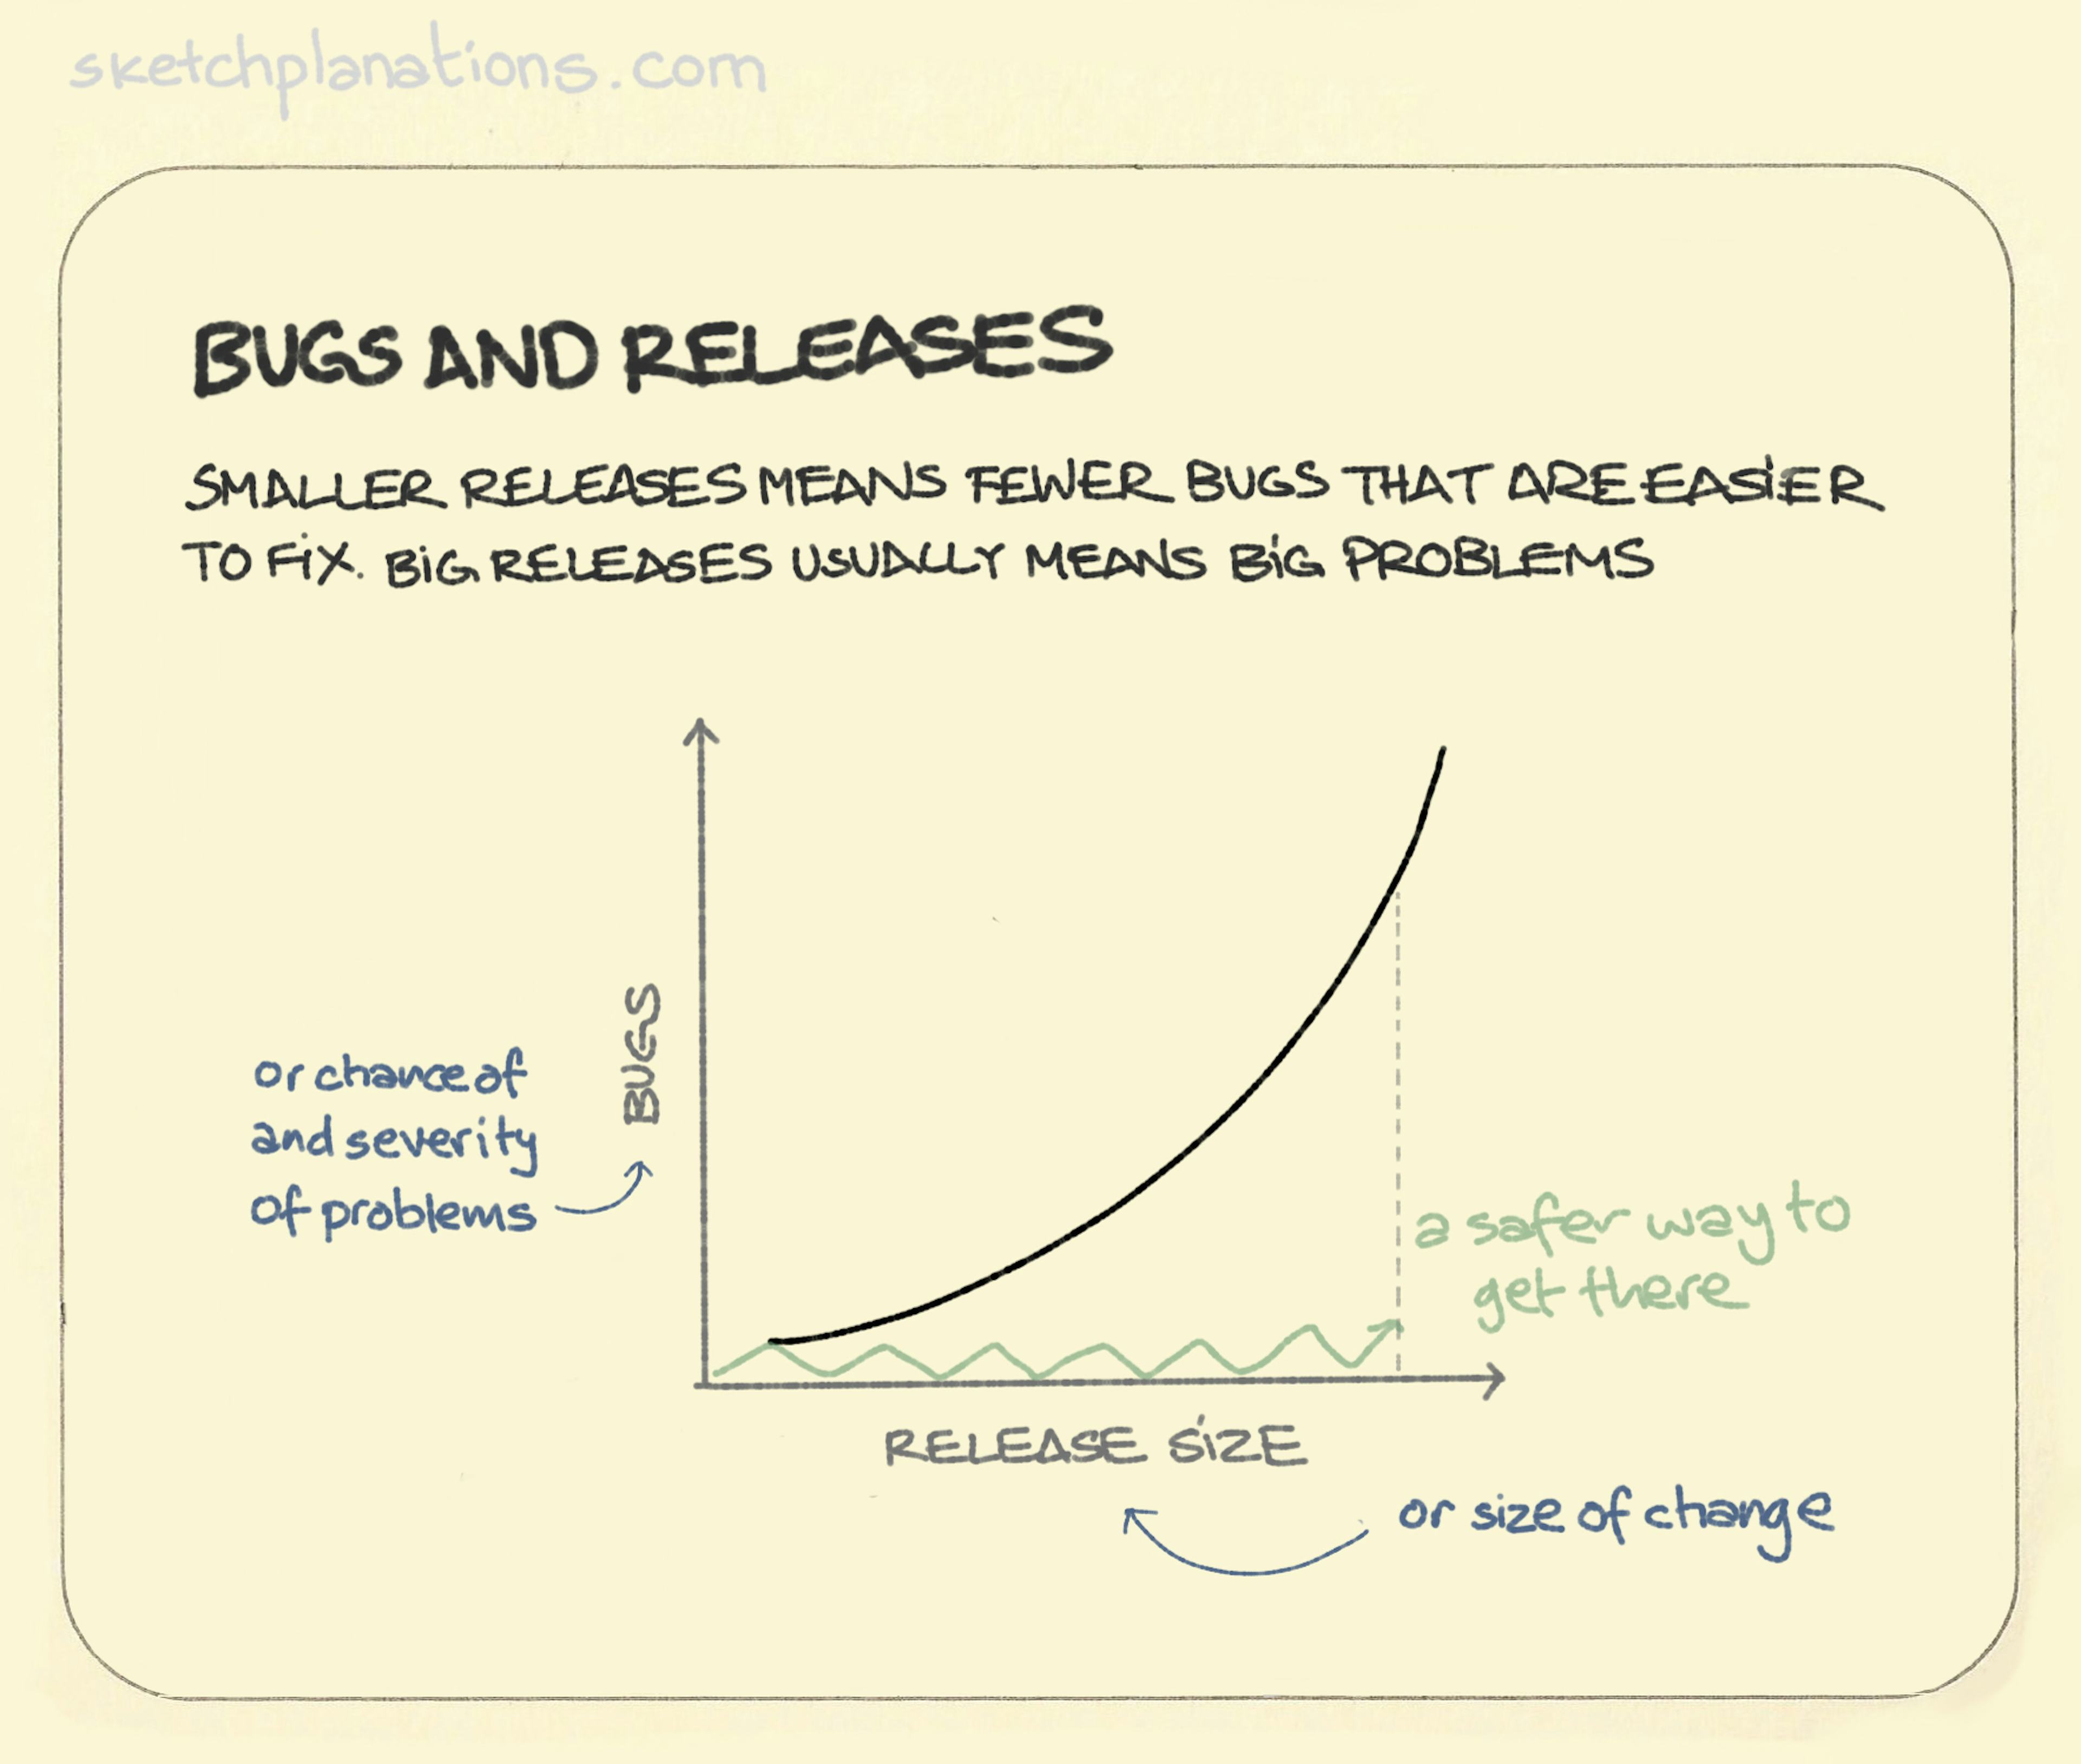 Bugs and releases illustration: an upward curve line graph shows the increase in risk for bugs or problems with software as the size of release increases. Instead of one large release, a series of smaller software updates each with smaller, more manageable risk is suggested. 